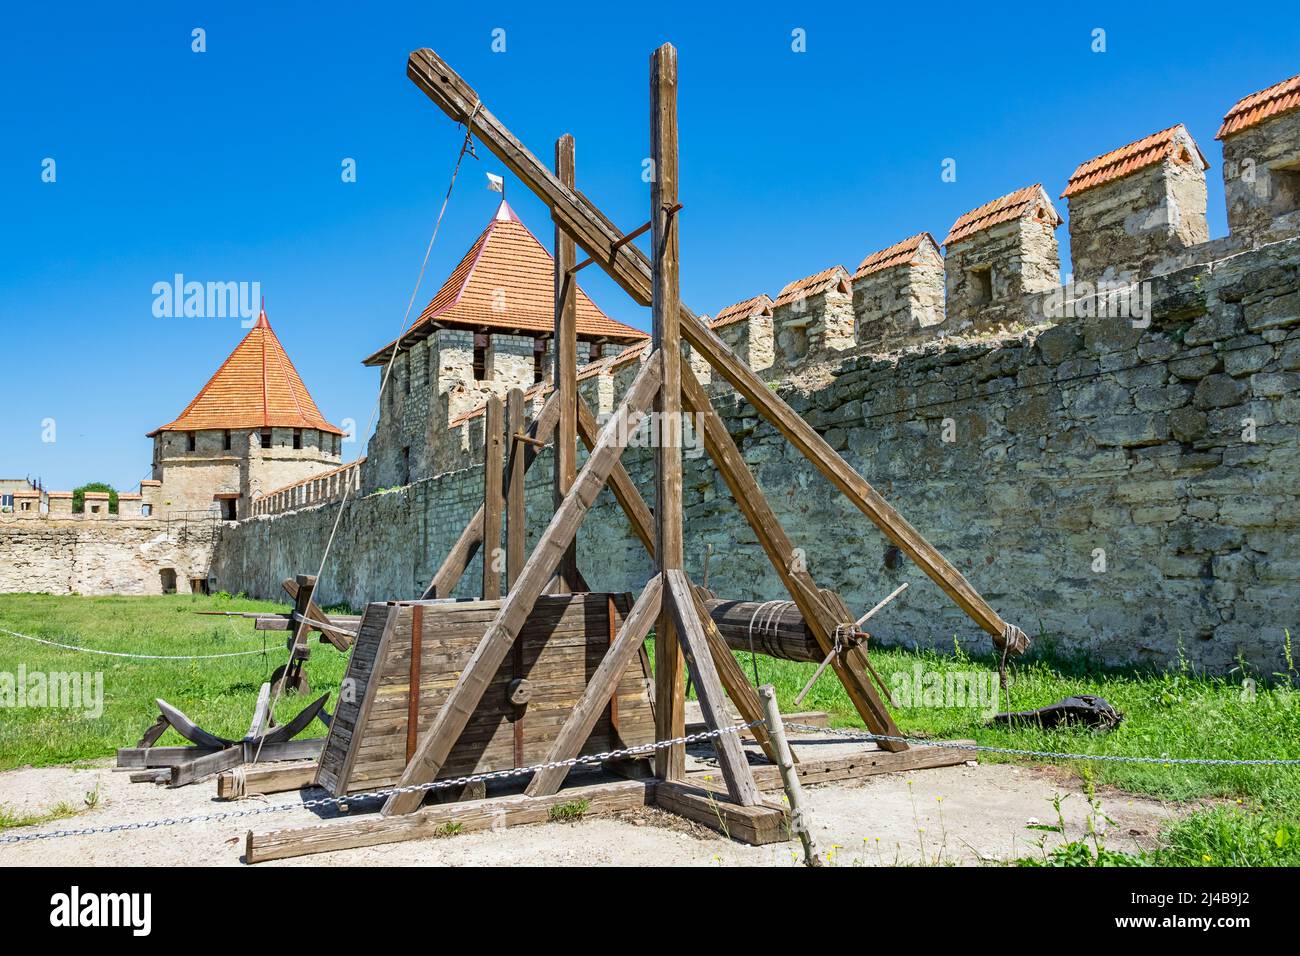 A trebuchet exhibited at Bender Fortress in Bender (Tighina), Transnistria, Moldova. It was an ancient throwing weapon. Stock Photo